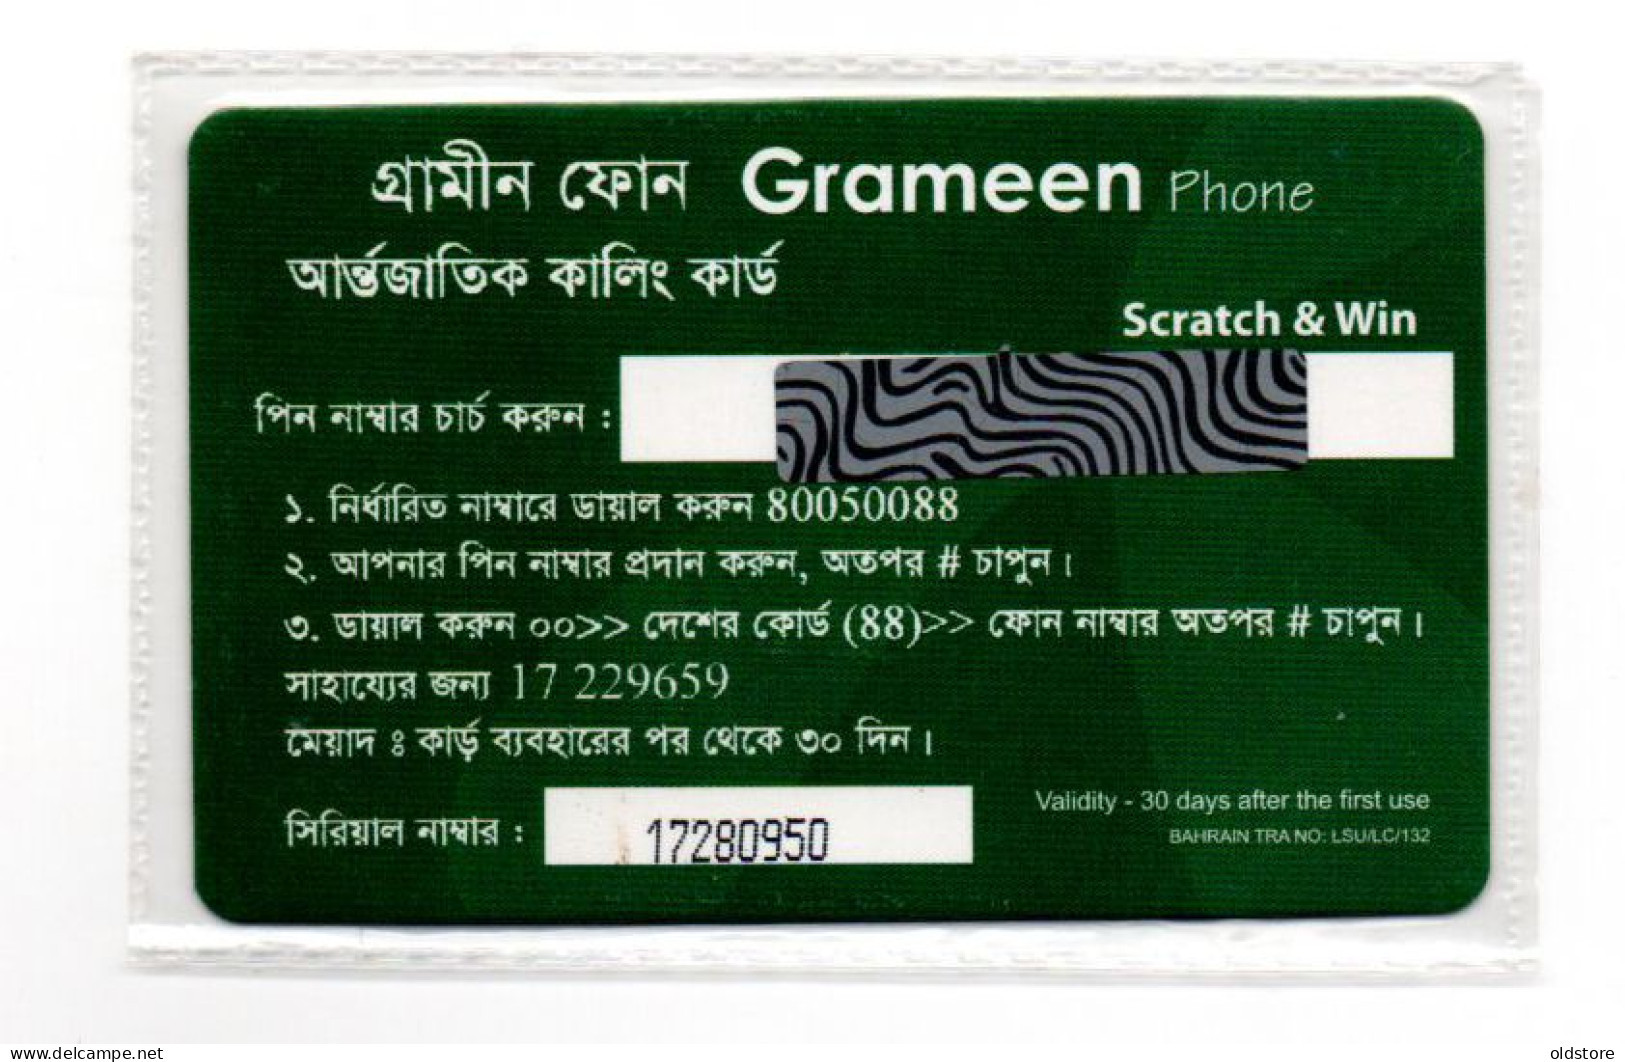 Bahrain Phonecards - For Grameen Phone Indian Company It Was In Bahrain - Colling Card - Mint Card 1 Dinar Voucher - Bahrain